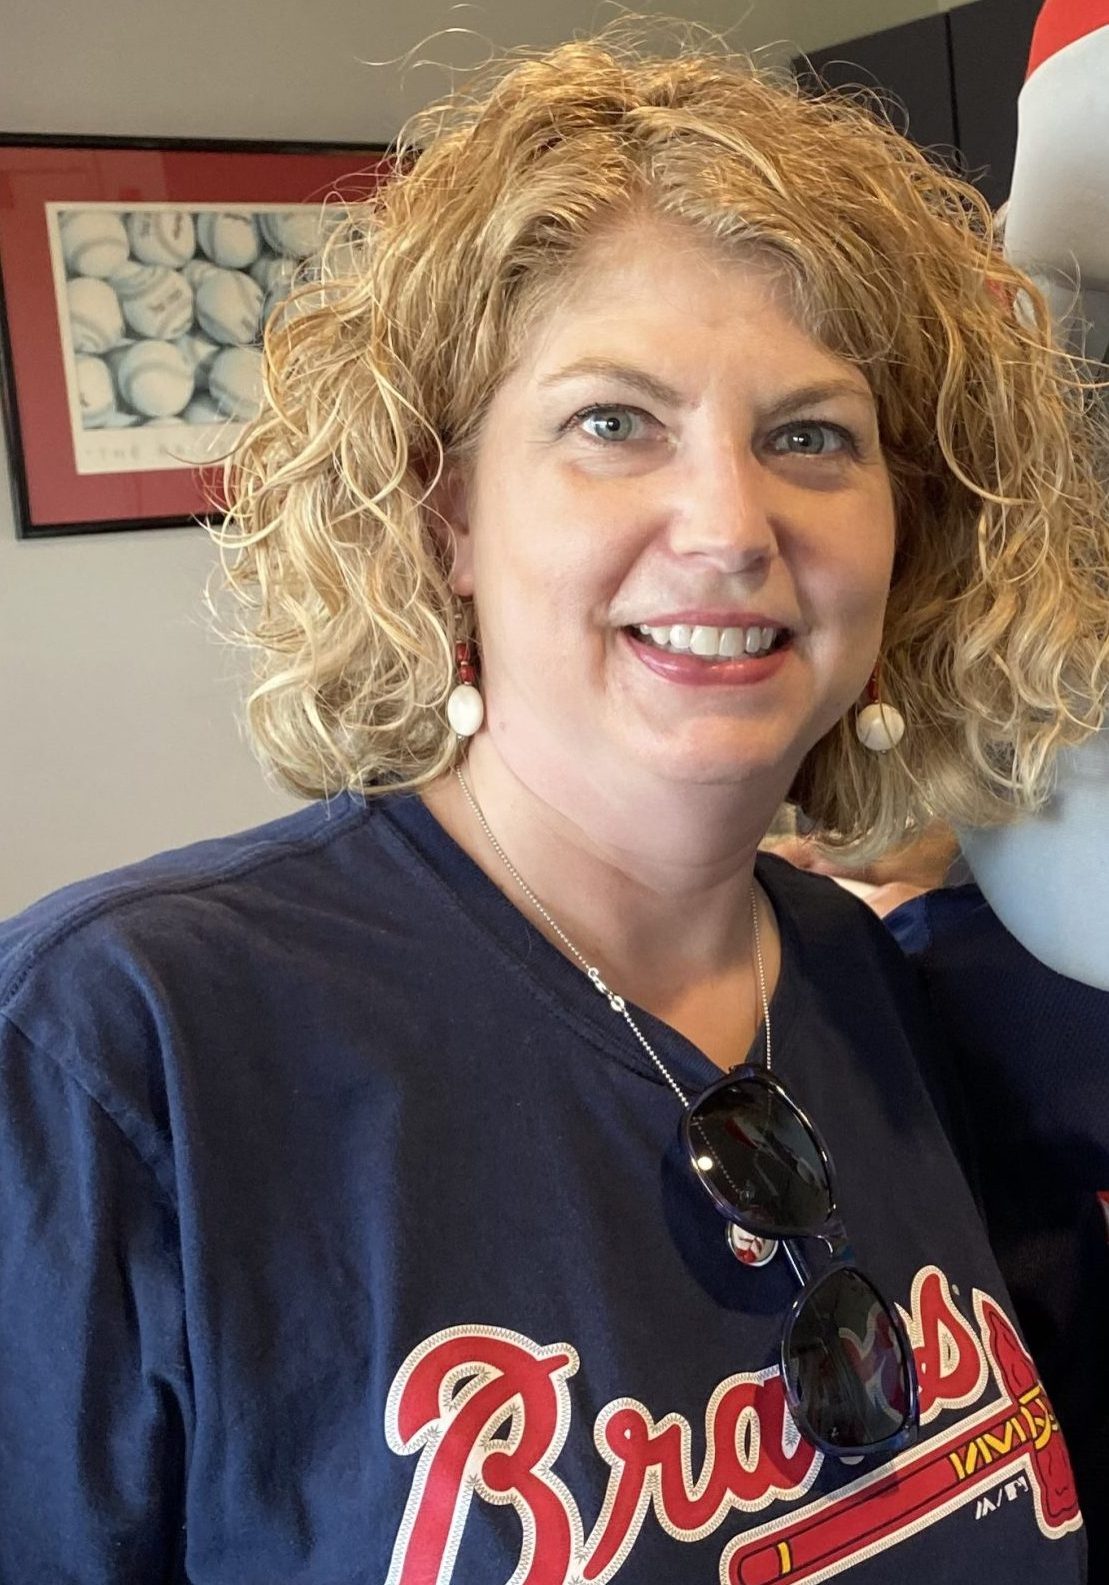 Woman with curly hair smiling, wearing a braves shirt